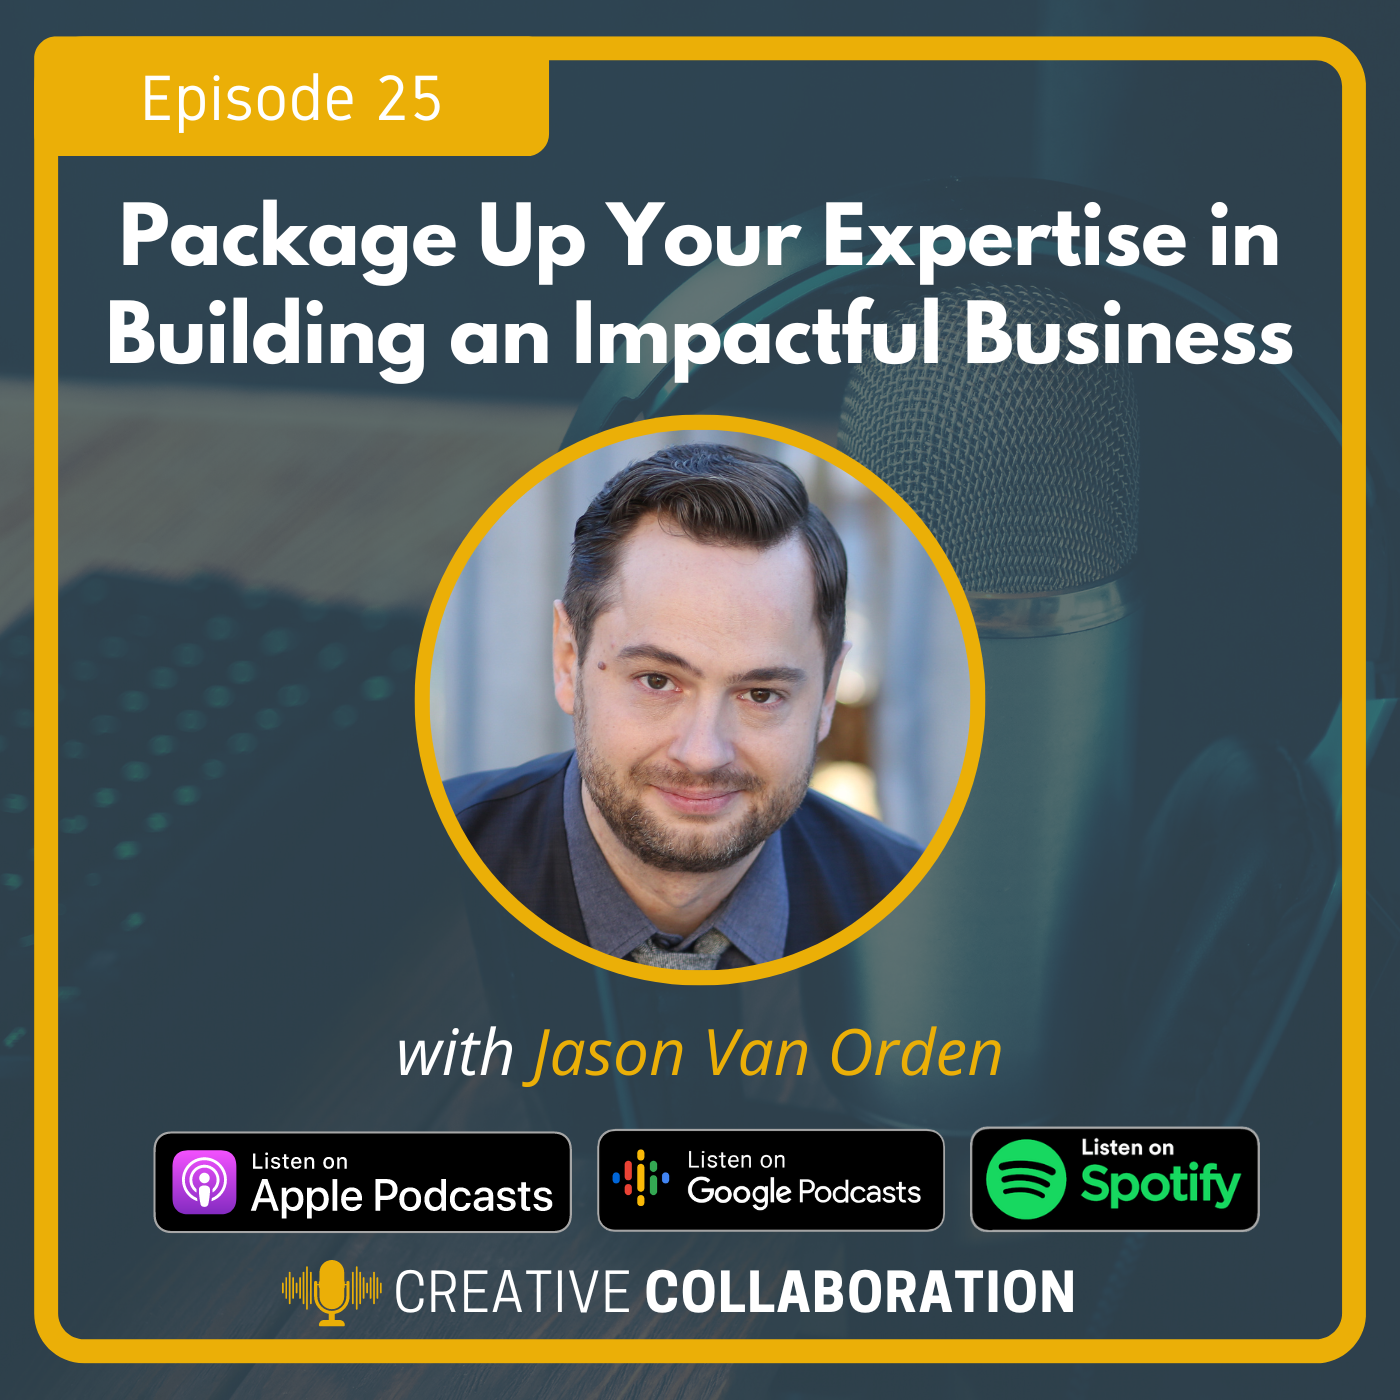 Package Up Your Expertise in Building an Impactful Business with Jason Van Orden